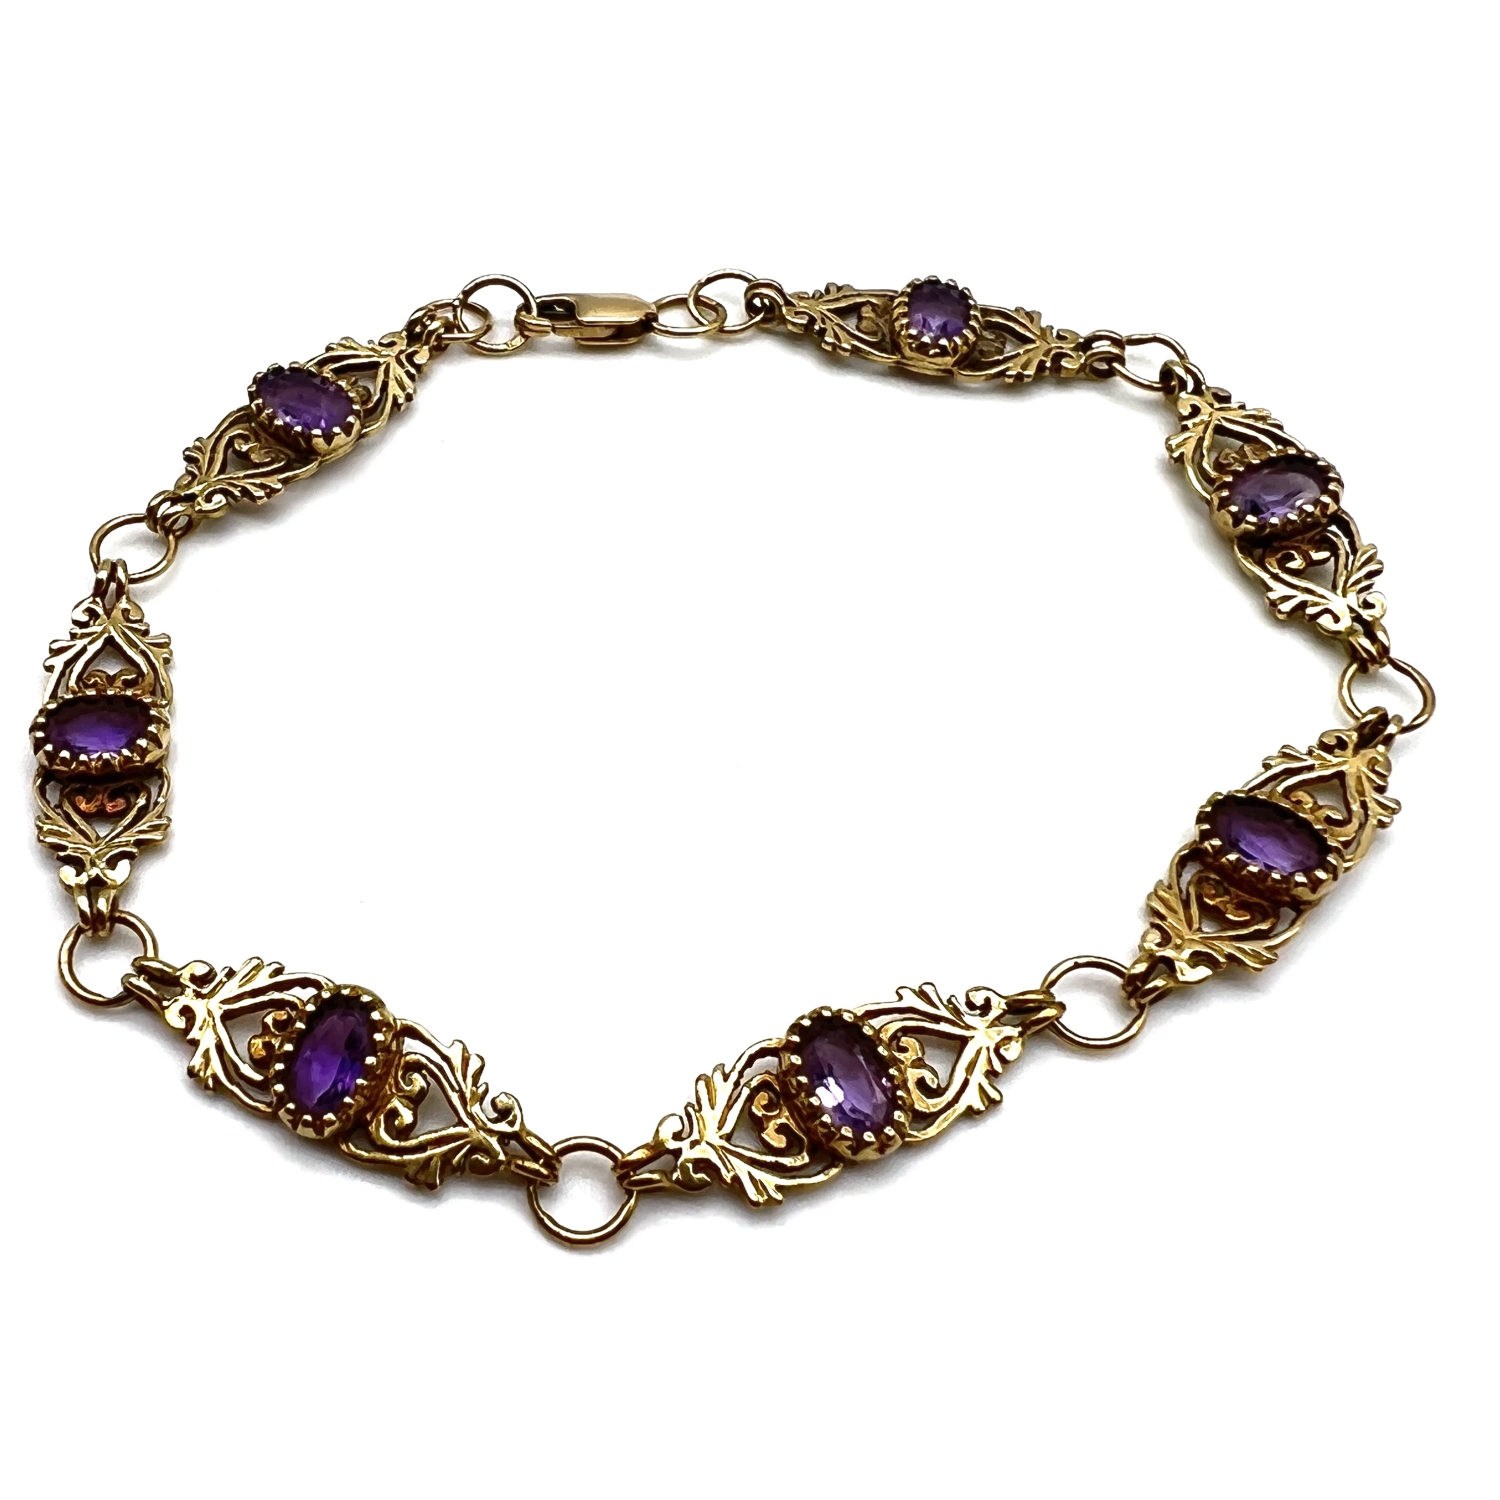 Fine 9ct gold and amethyst bracelet. Marked for 9ct gold and set with amethyst stones. Measures 19. - Image 2 of 5